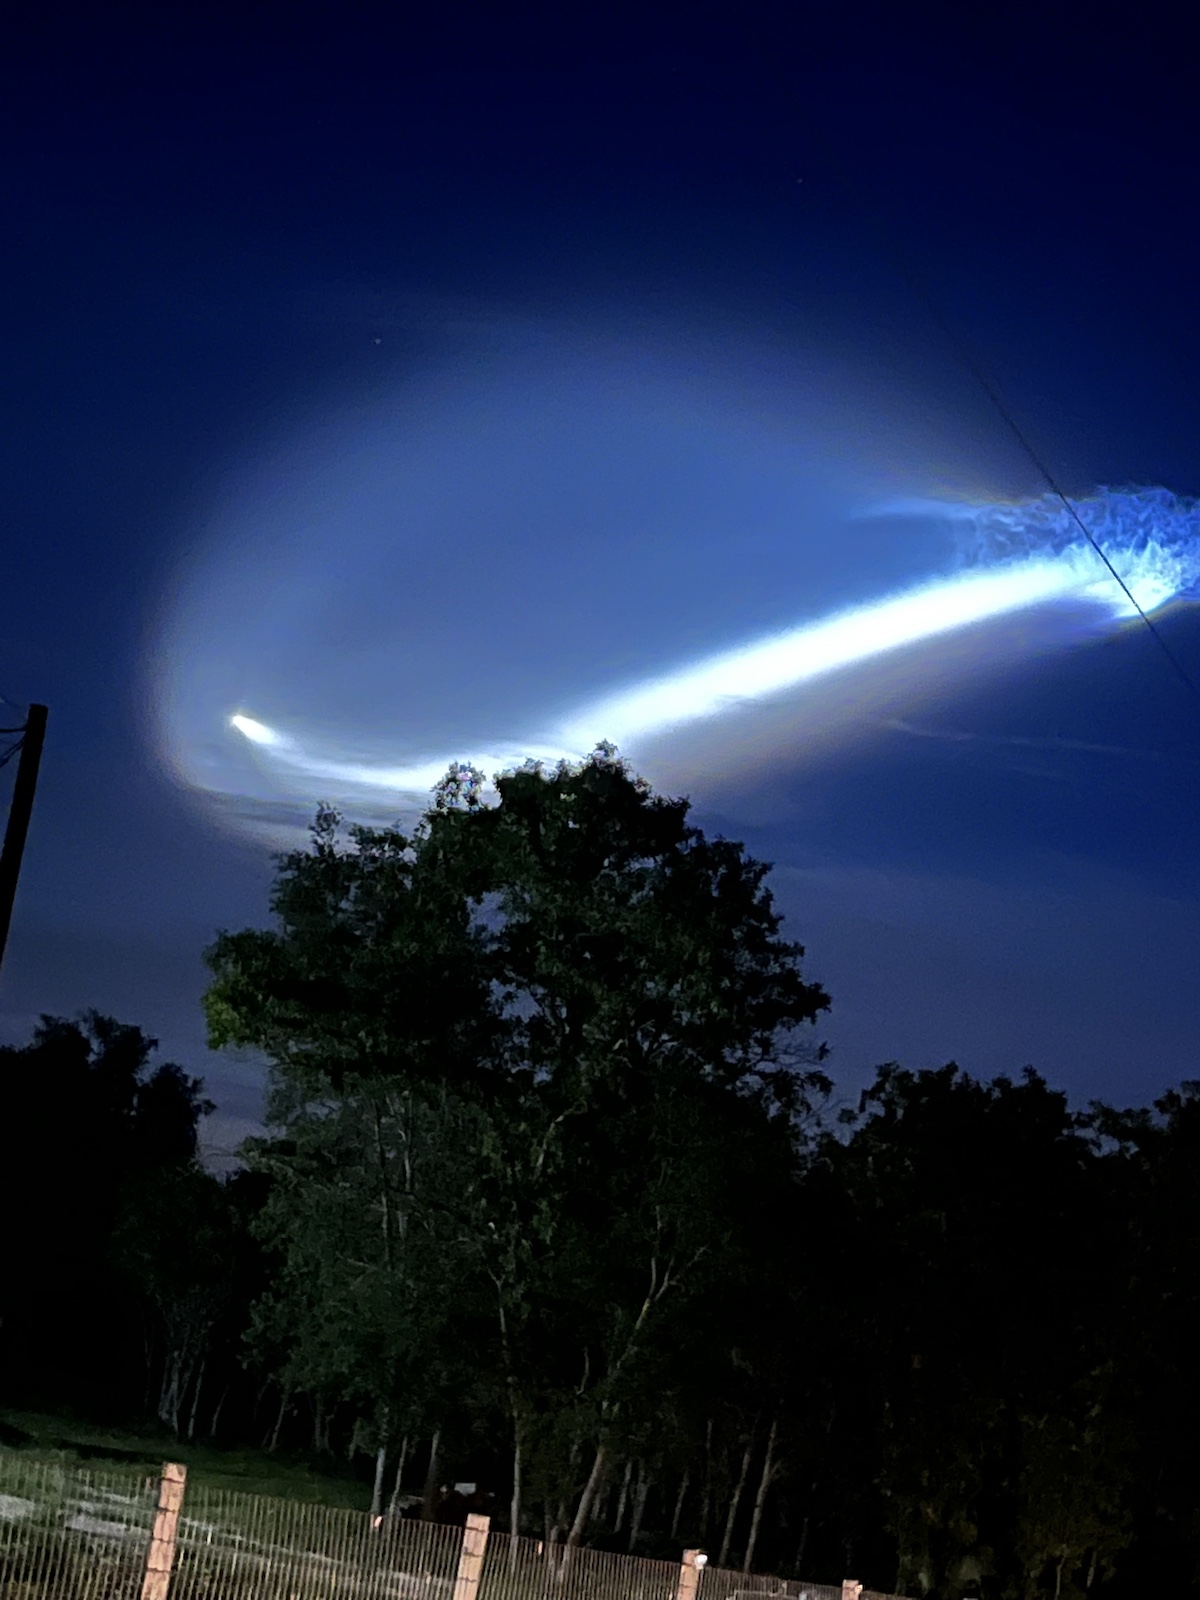 Another View Of SpaceX Falcon 9 Launch From Ocala